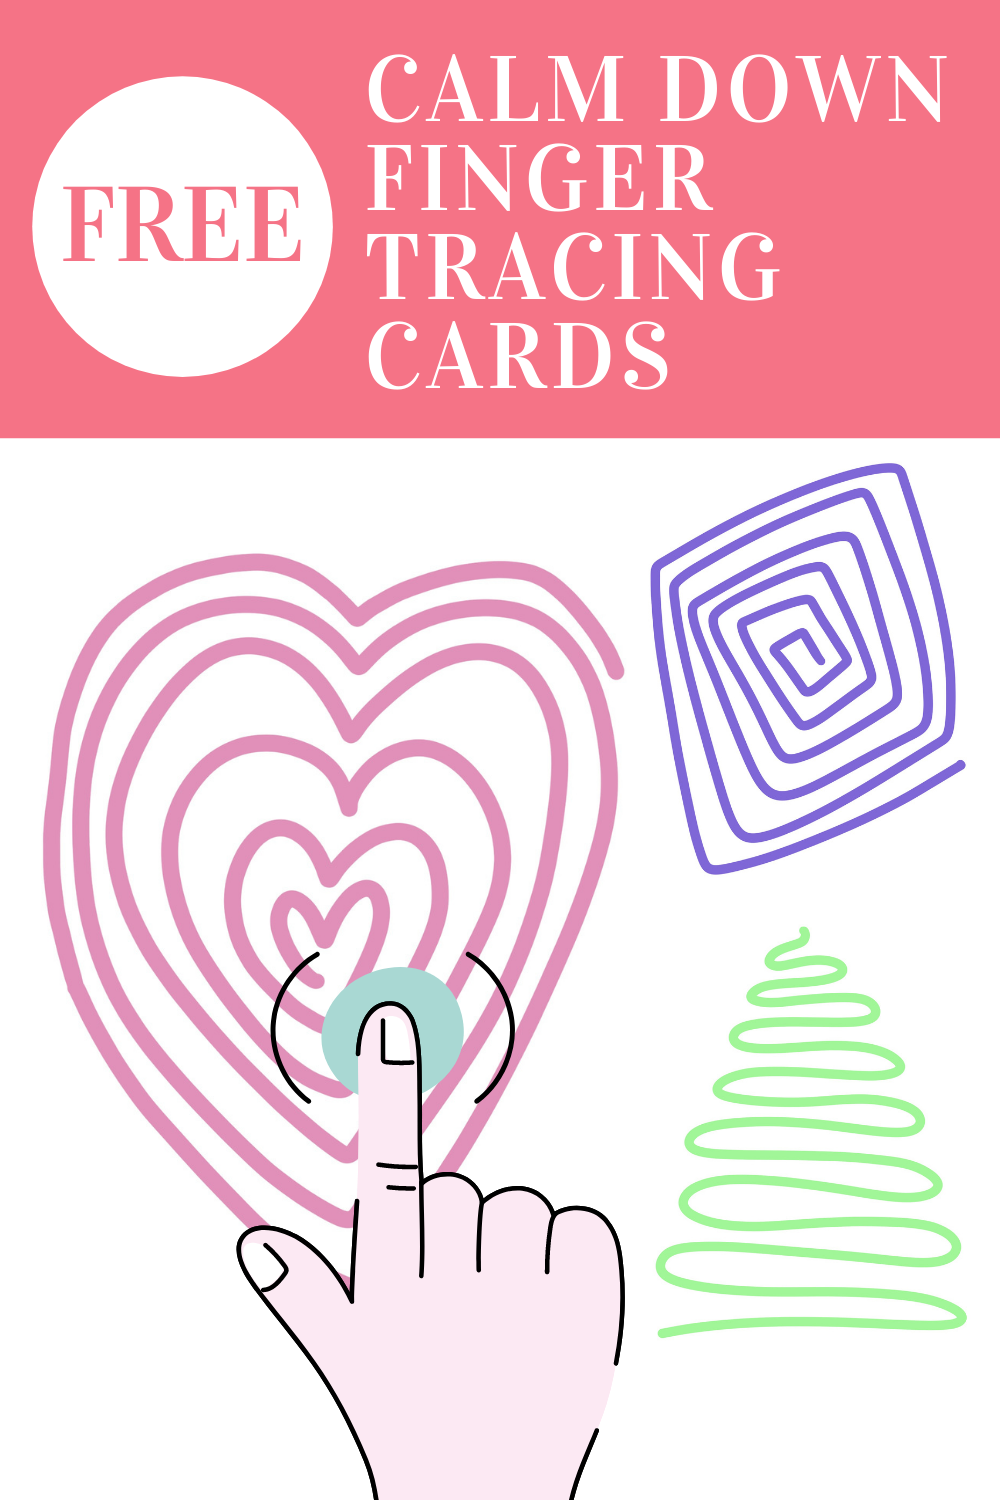 Free Finger Tracing Calm Down Cards